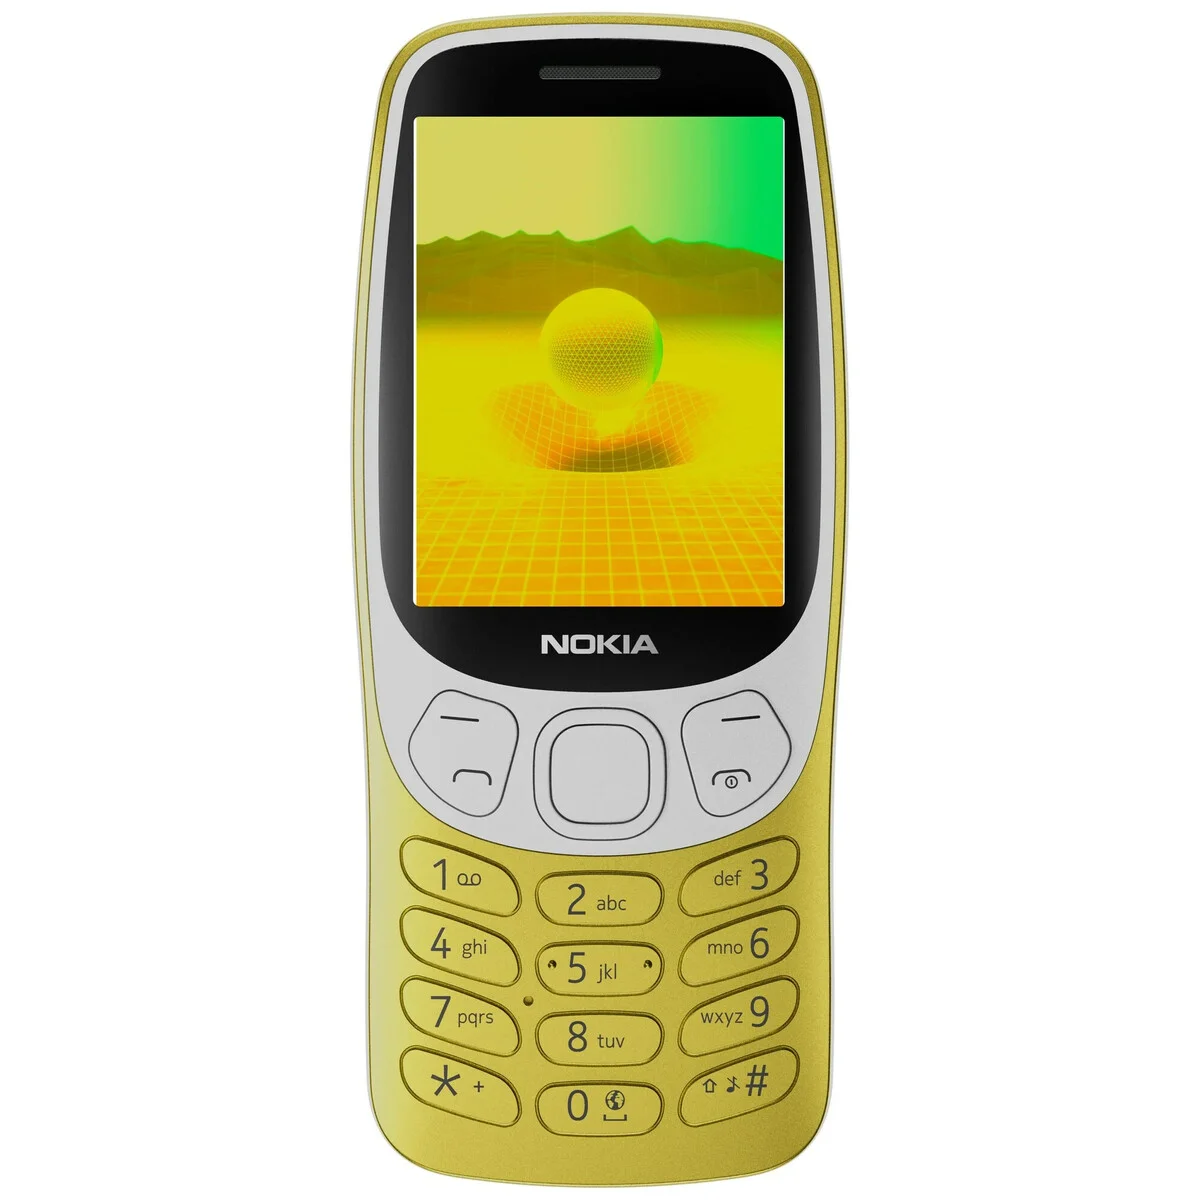 Specifications and renderings of the new push-button Nokia have been published